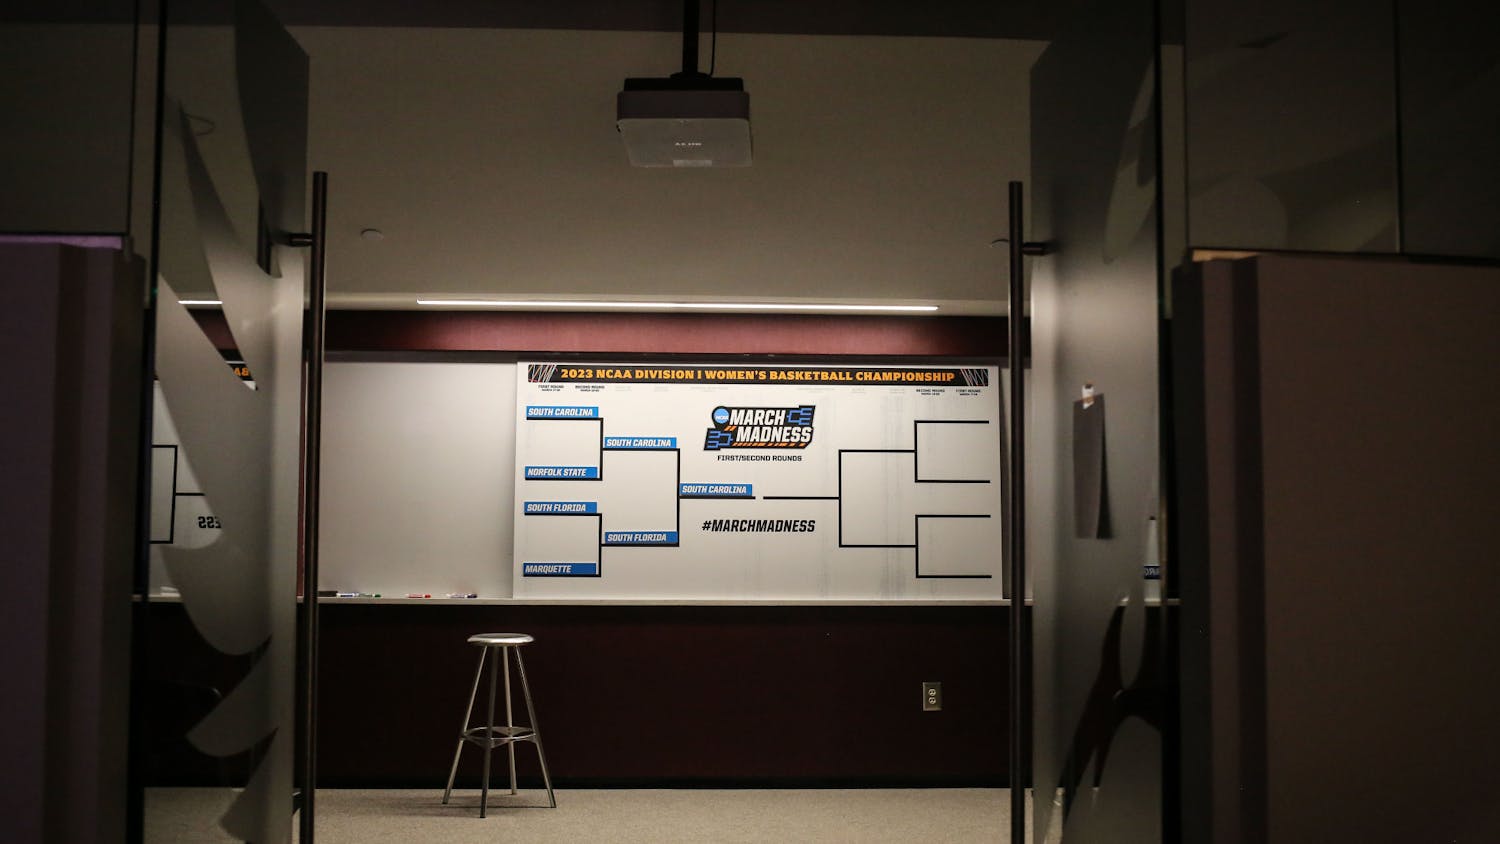 An updated NCAA bracket sits on display in the South Carolina locker room following the Gamecocks' win over South Florida in round two of the NCAA tournament at Colonial Life Arena on March 19, 2023. The Gamecocks defeated the Bulls 76-45.